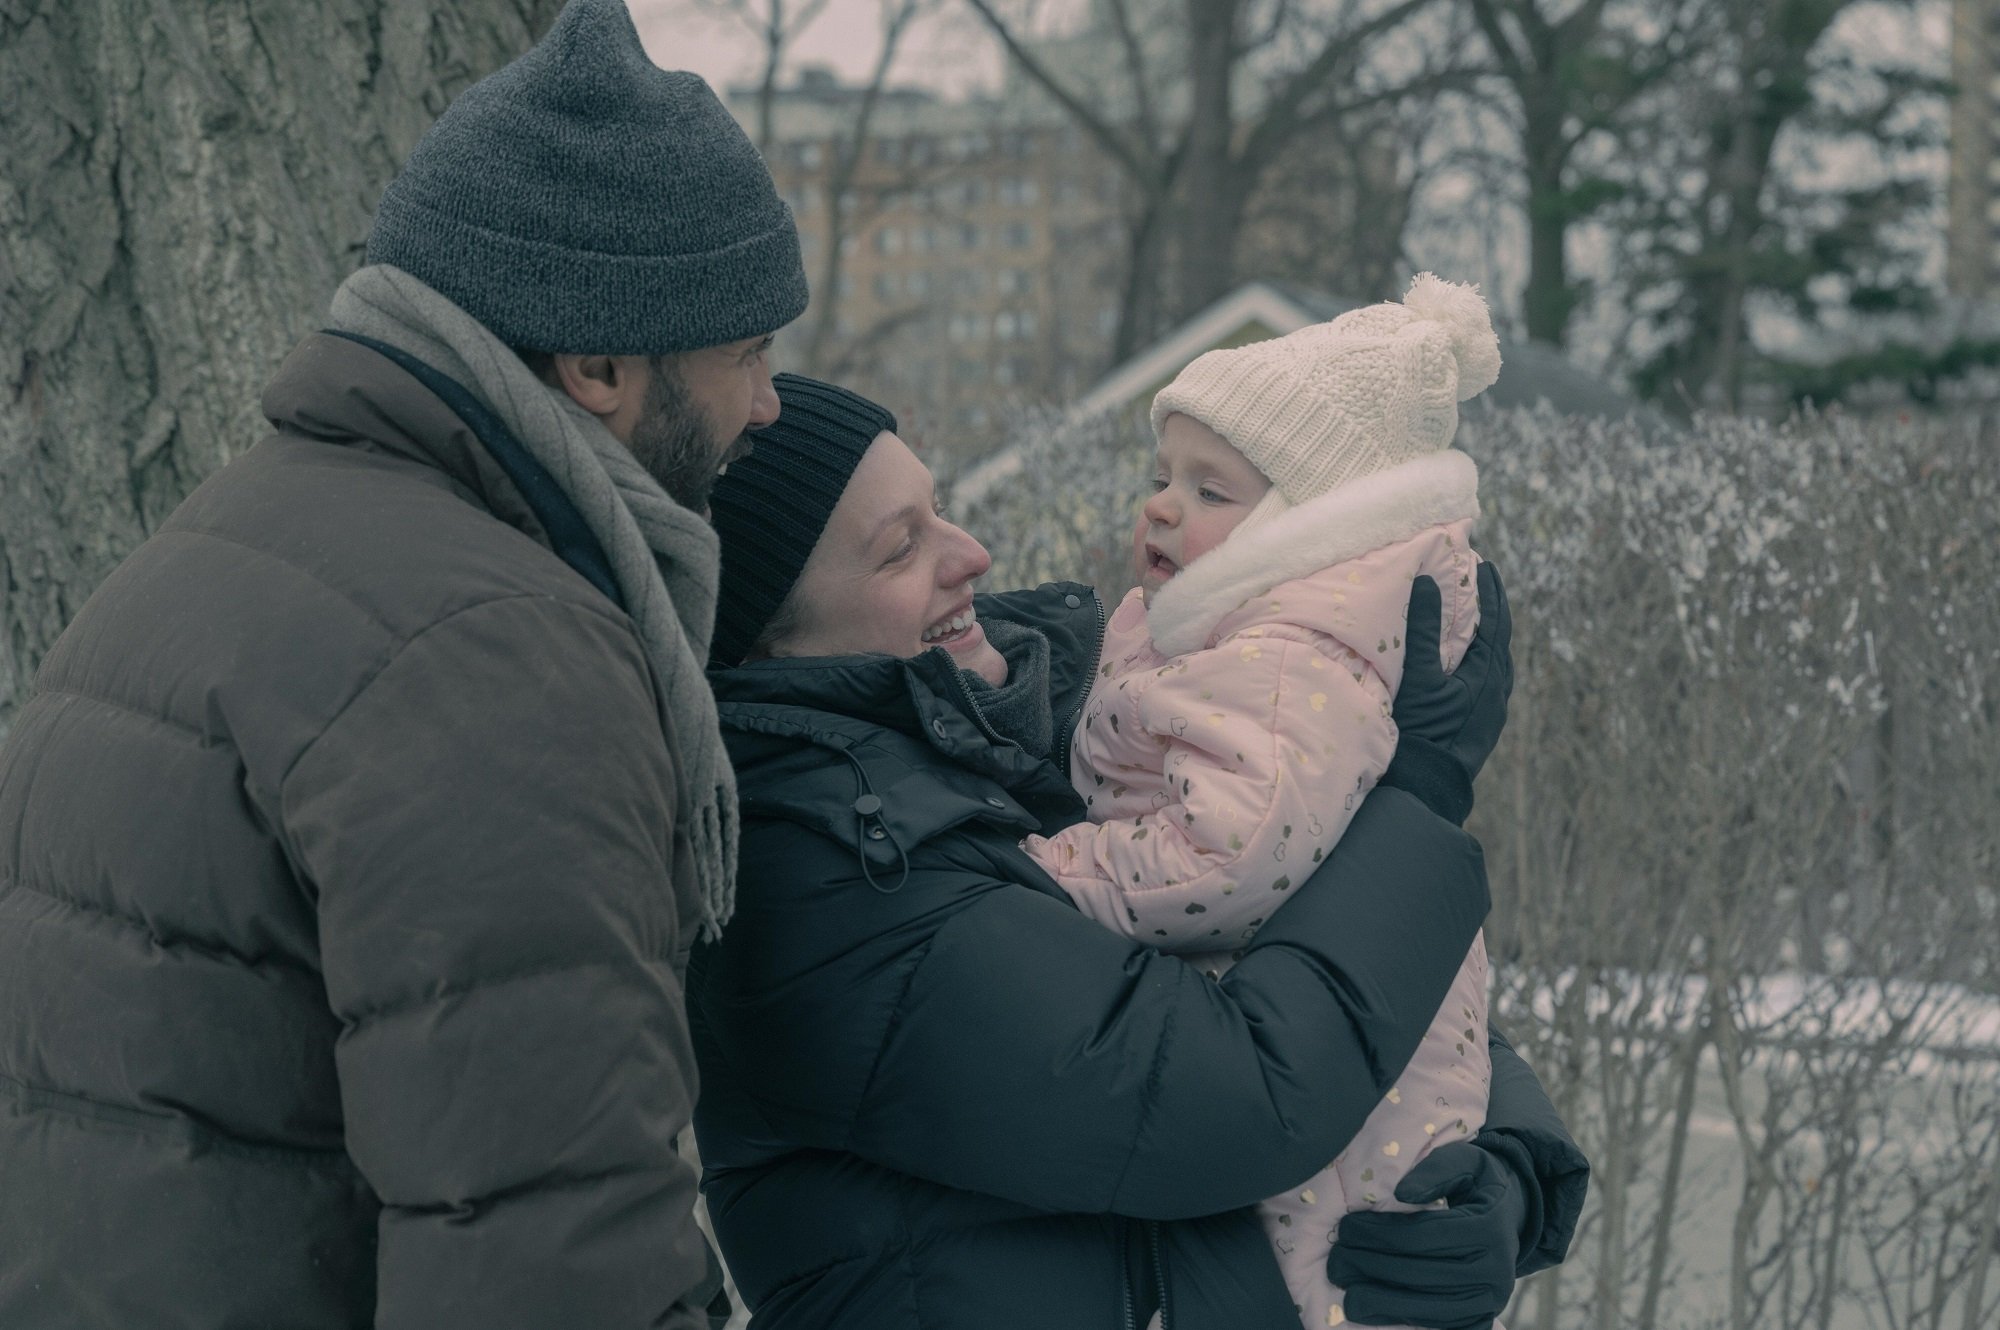 Luke (O-T Fagbenle) and June (Elisabeth Moss) play with Nichole in the snow in 'The Handmaid's Tale'